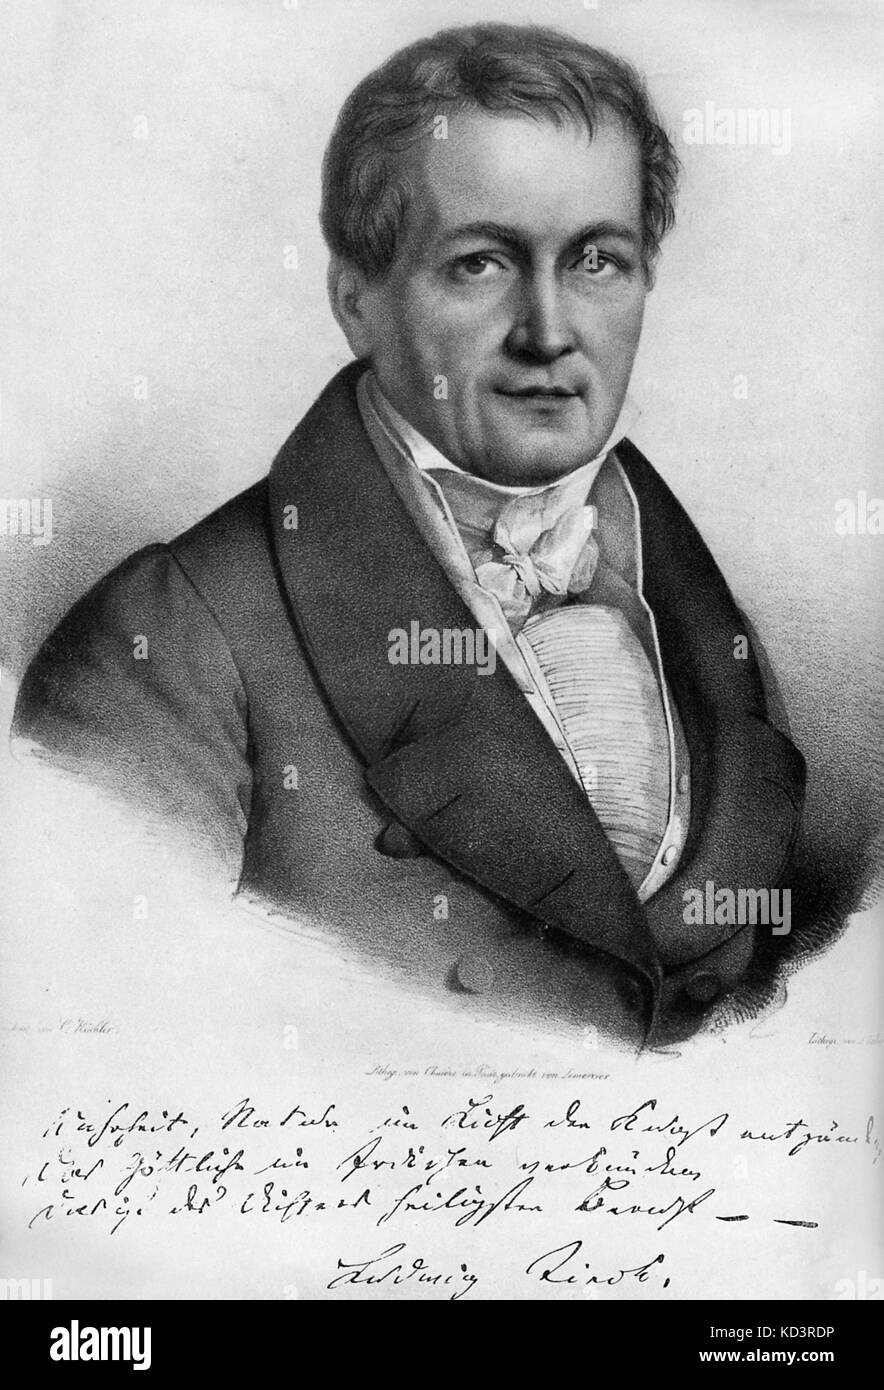 Ludwig Tieck -portrait. with signature. German writer on Shakespeare. 31 st May 1773 - 28 april, 1853.  Wrote under pseudonym of Peter Lebrecht. Stock Photo